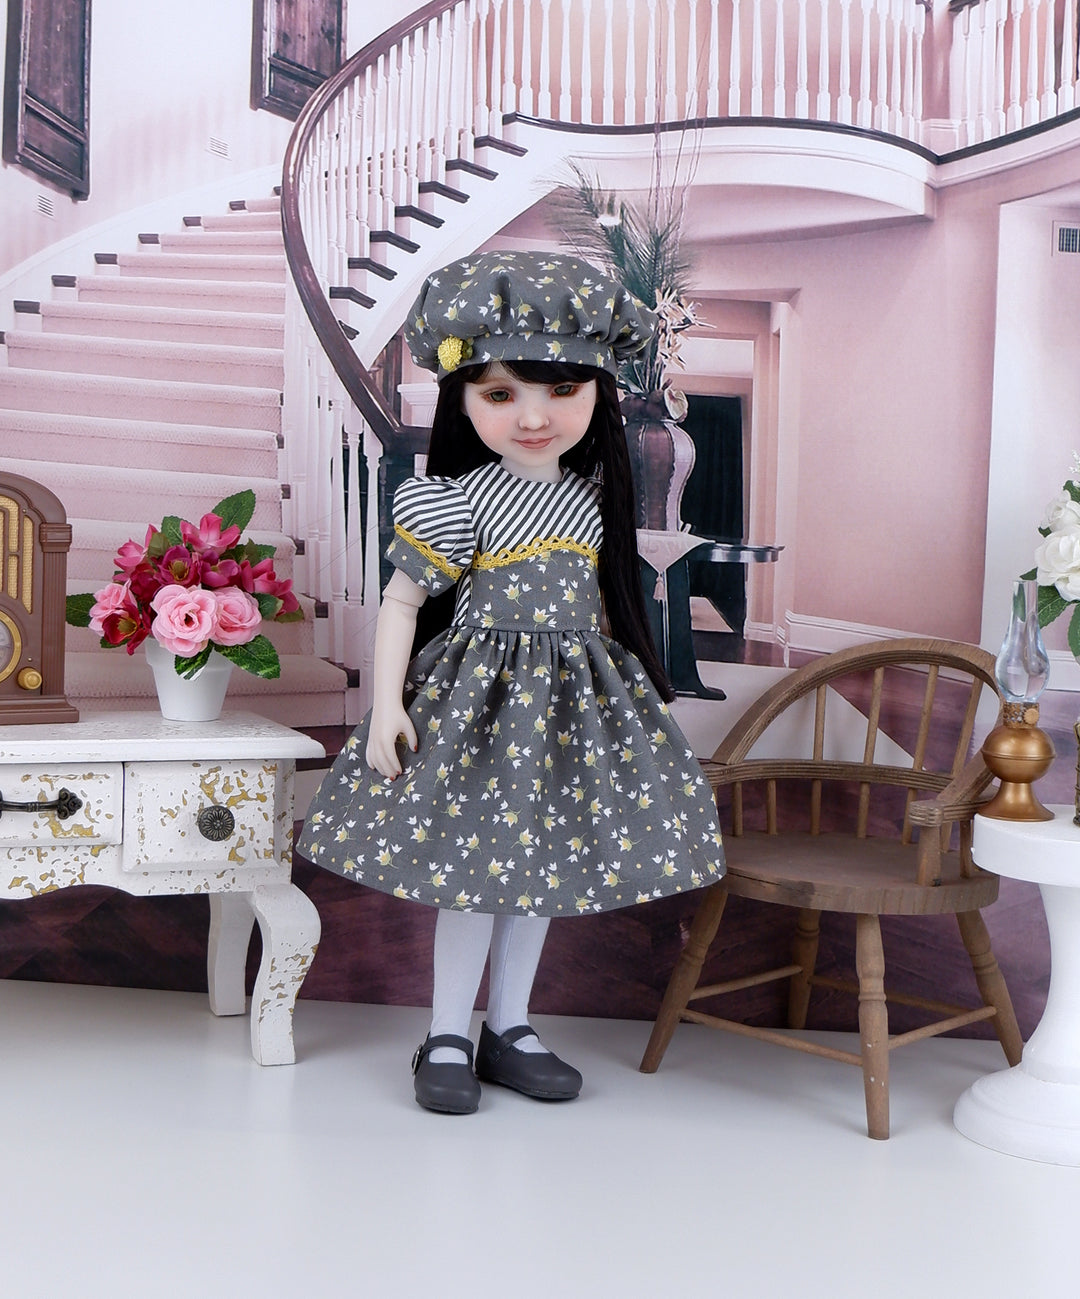 Scattered Buttercups - dress and shoes for Ruby Red Fashion Friends doll